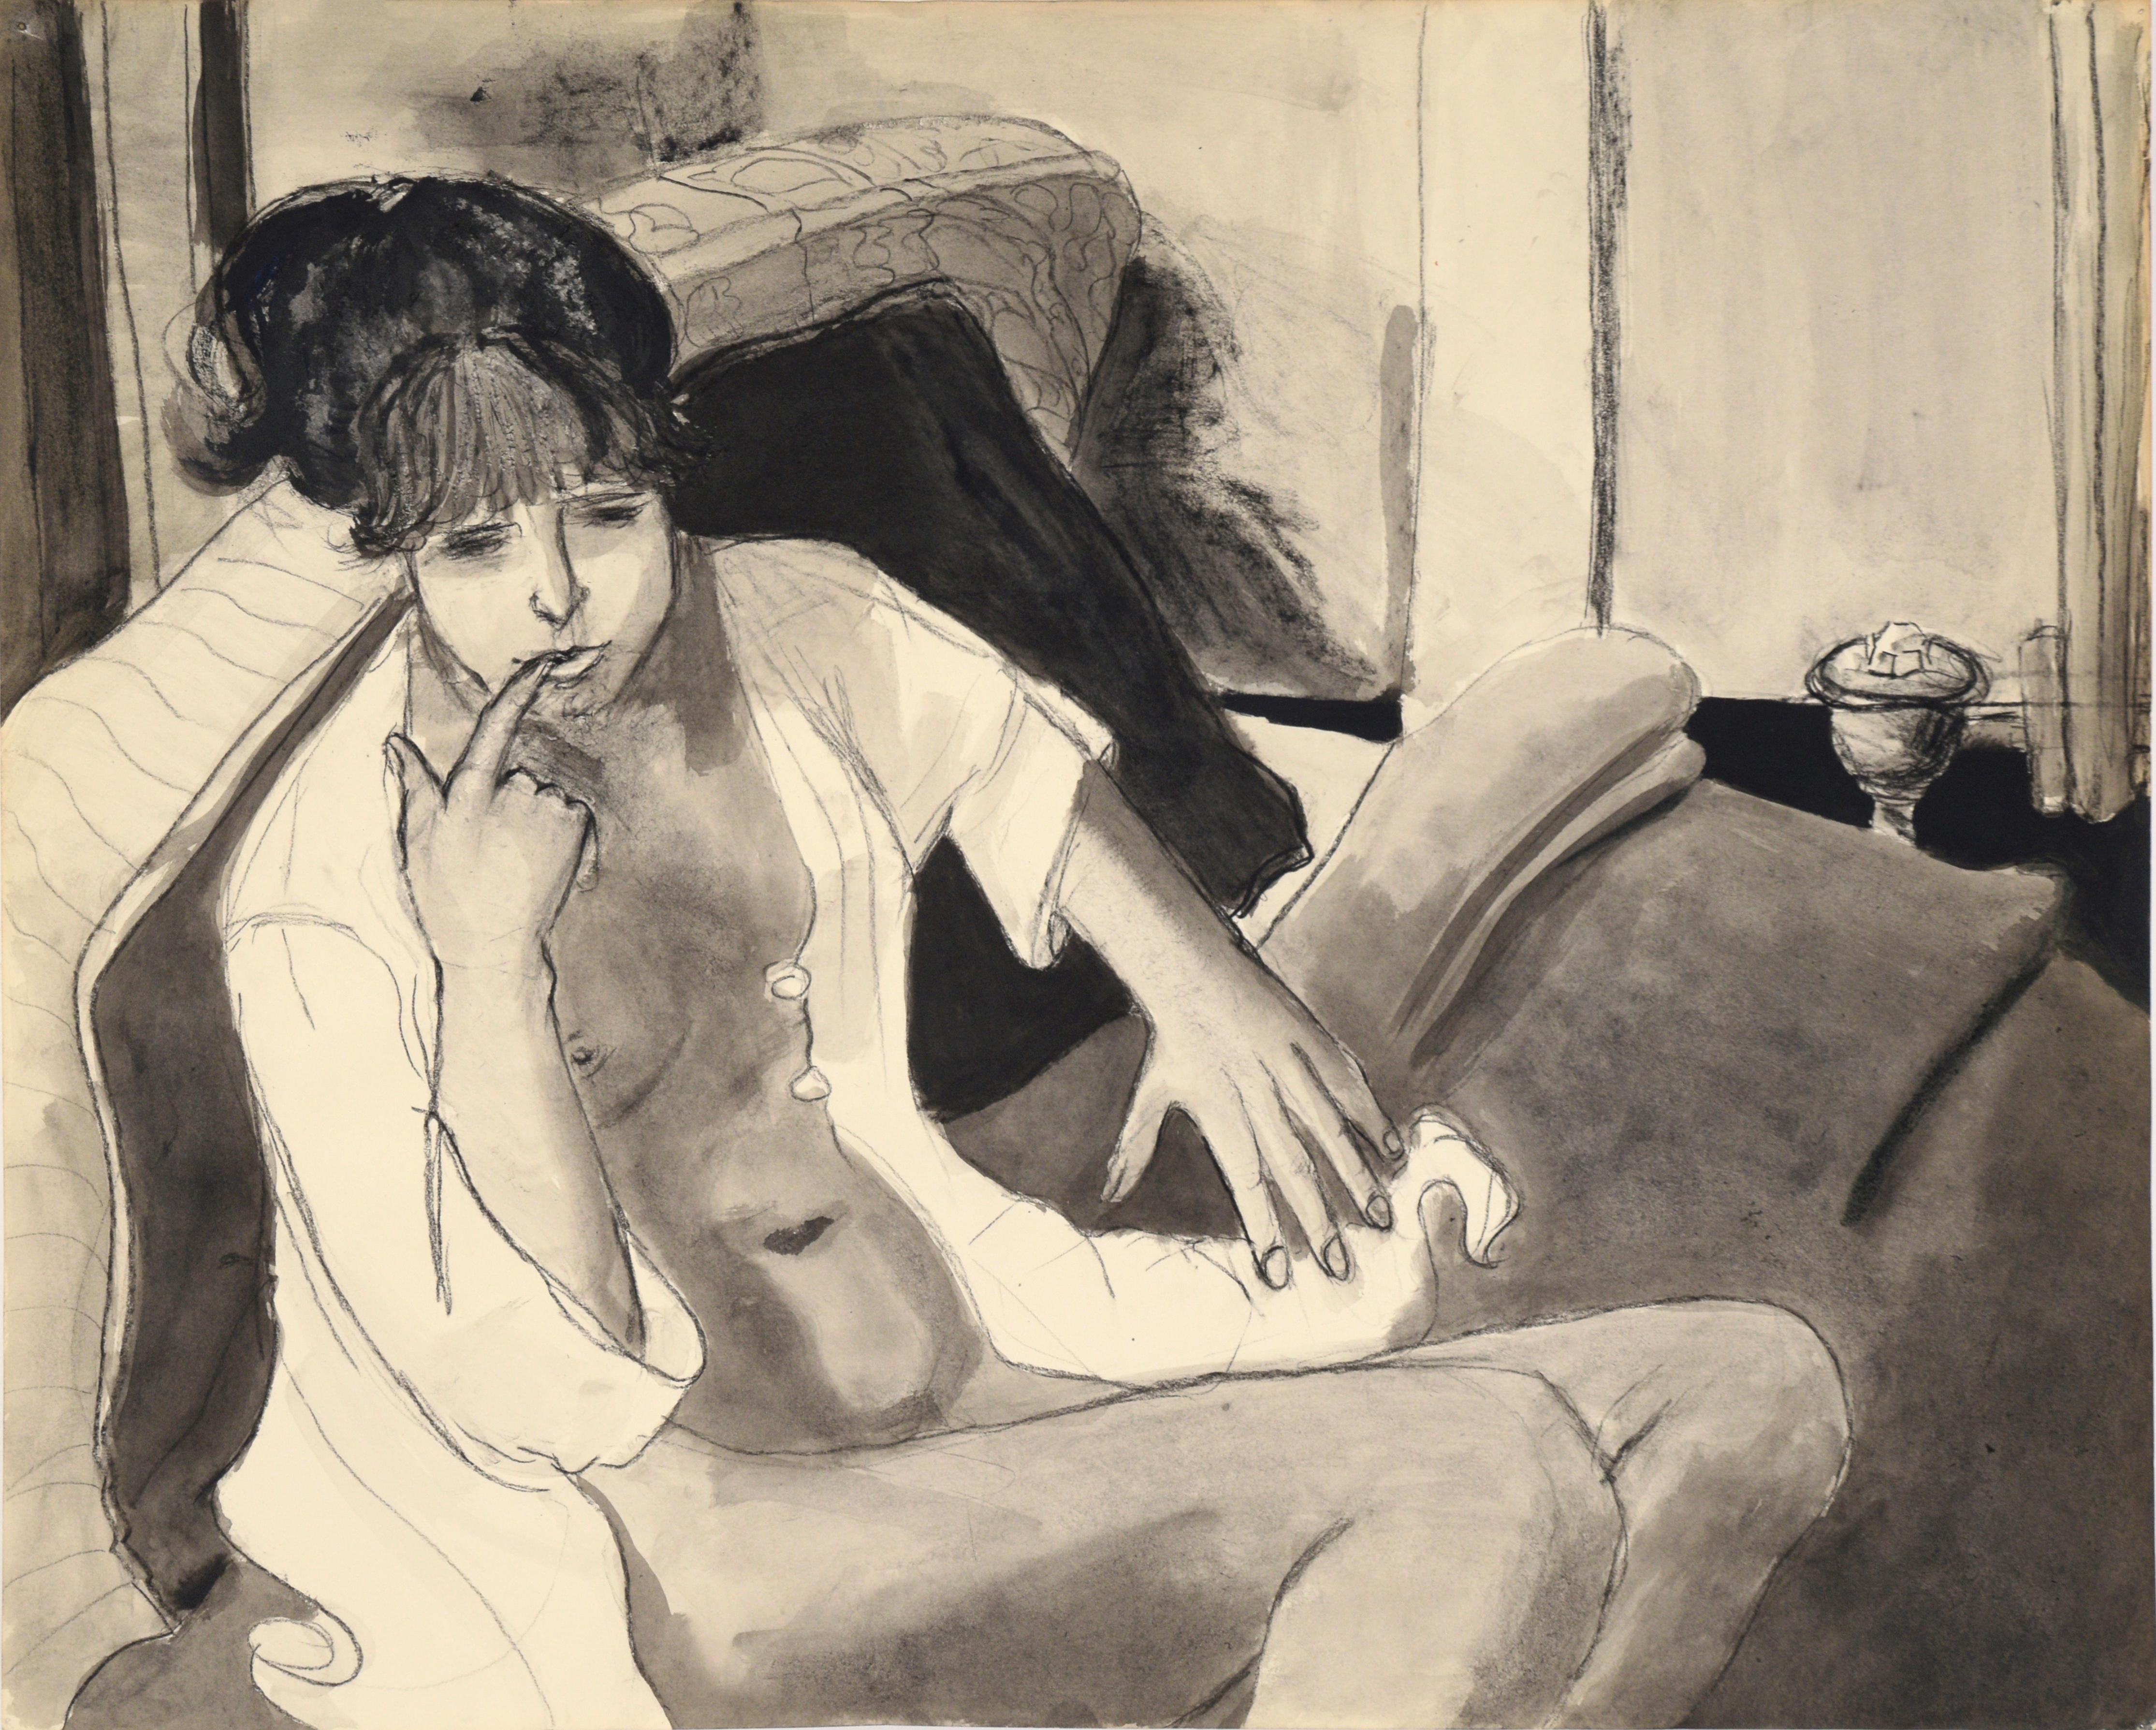 Katherine Kallick Figurative Painting - Model with Unbuttoned Blouse in Ink and Charcoal on Paper